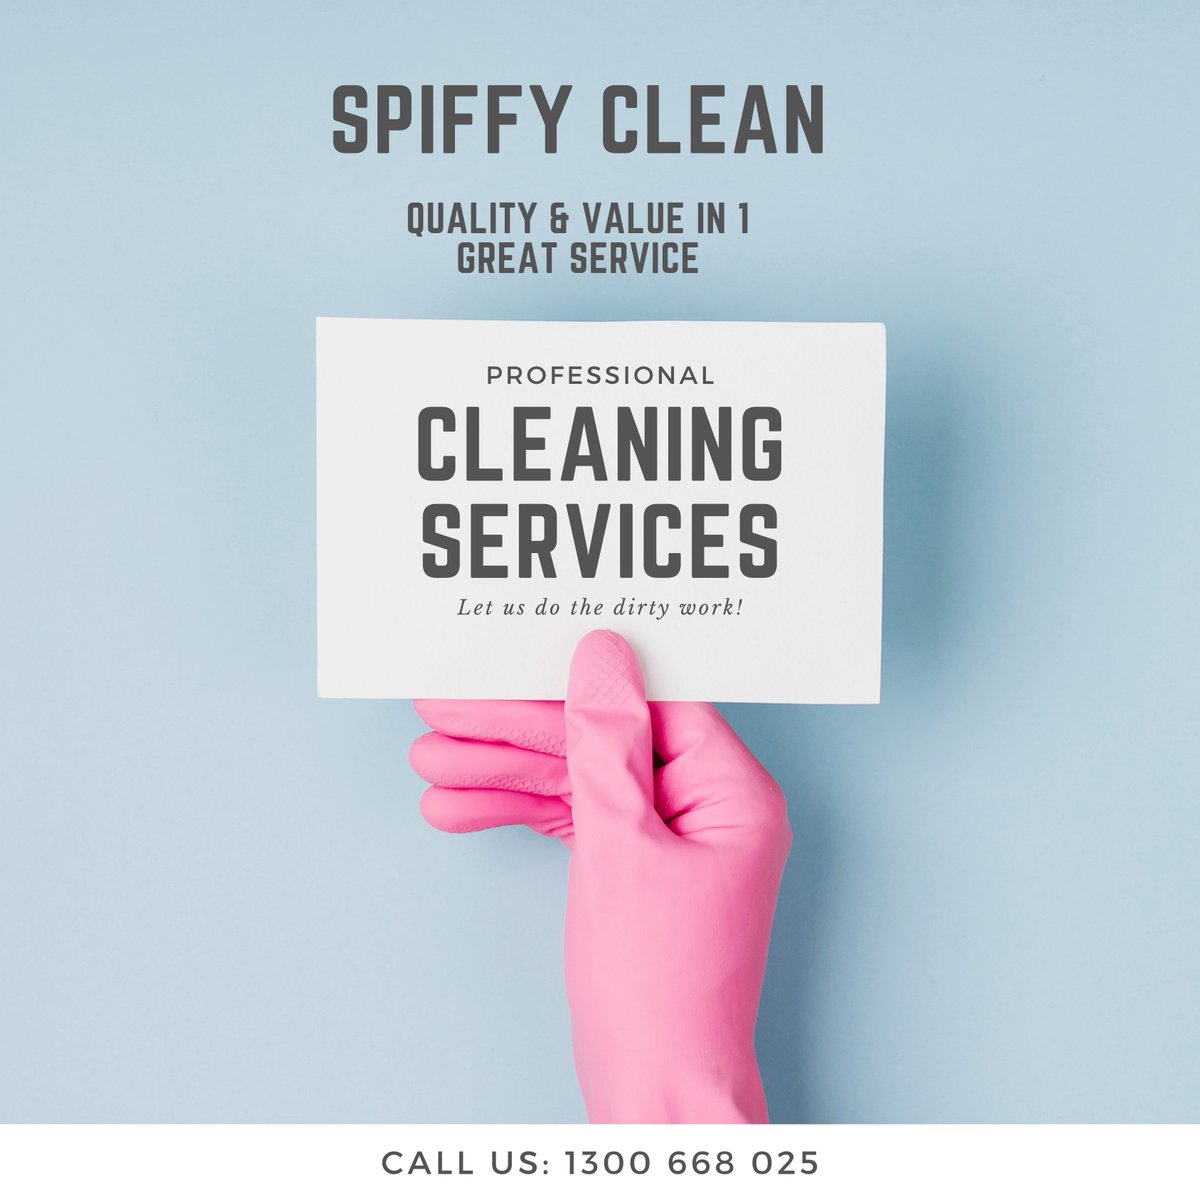 When it comes to commercial cleaning in Melbourne, SpiffyClean is your go-to choice for quality and value in one stellar service. Say goodbye to dirt and hello to a sparkling workspace! ✨💼 #SpiffyClean #Melbourne #CommercialCleaning

spiffyclean.com.au/commercial-cle…